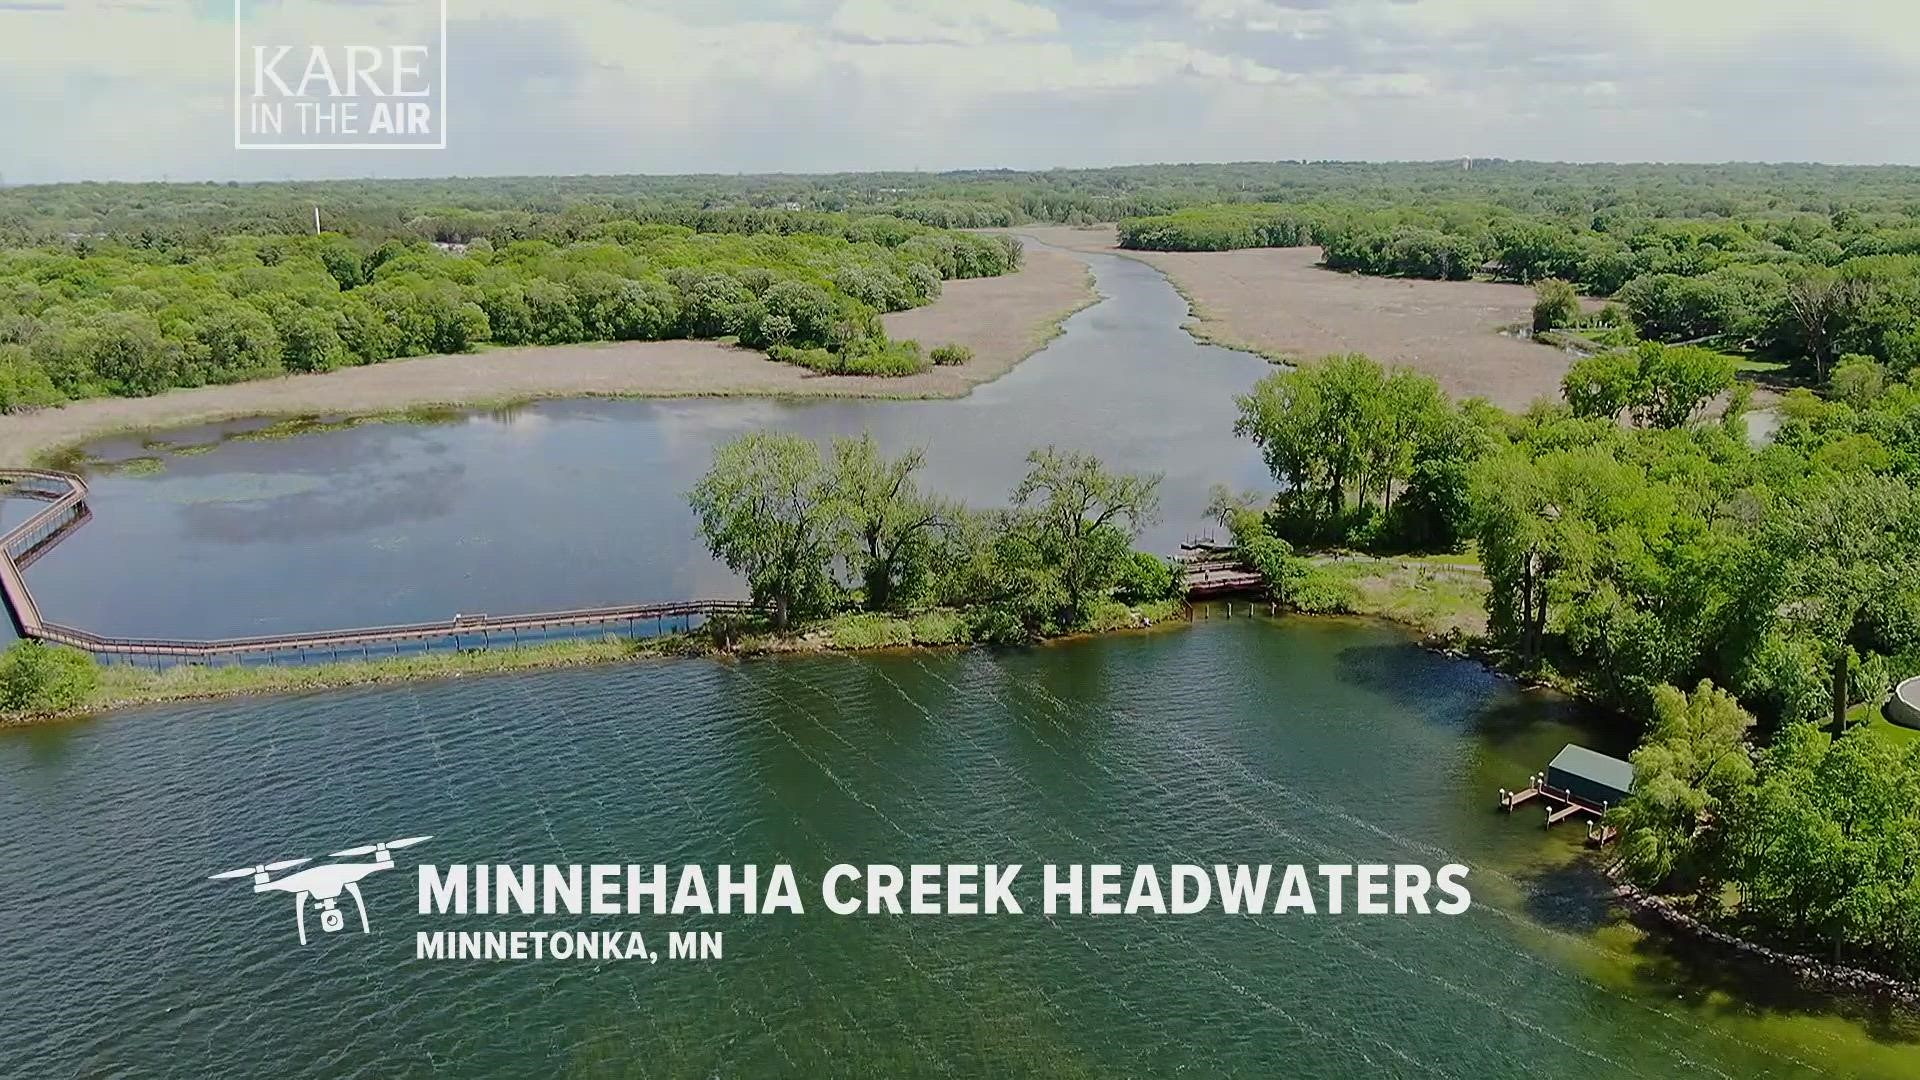 The Minnehaha Creek Watershed ends at the more famous falls, but 22 miles up the creek is where everything starts, at the headwaters on Lake Minnetonka.